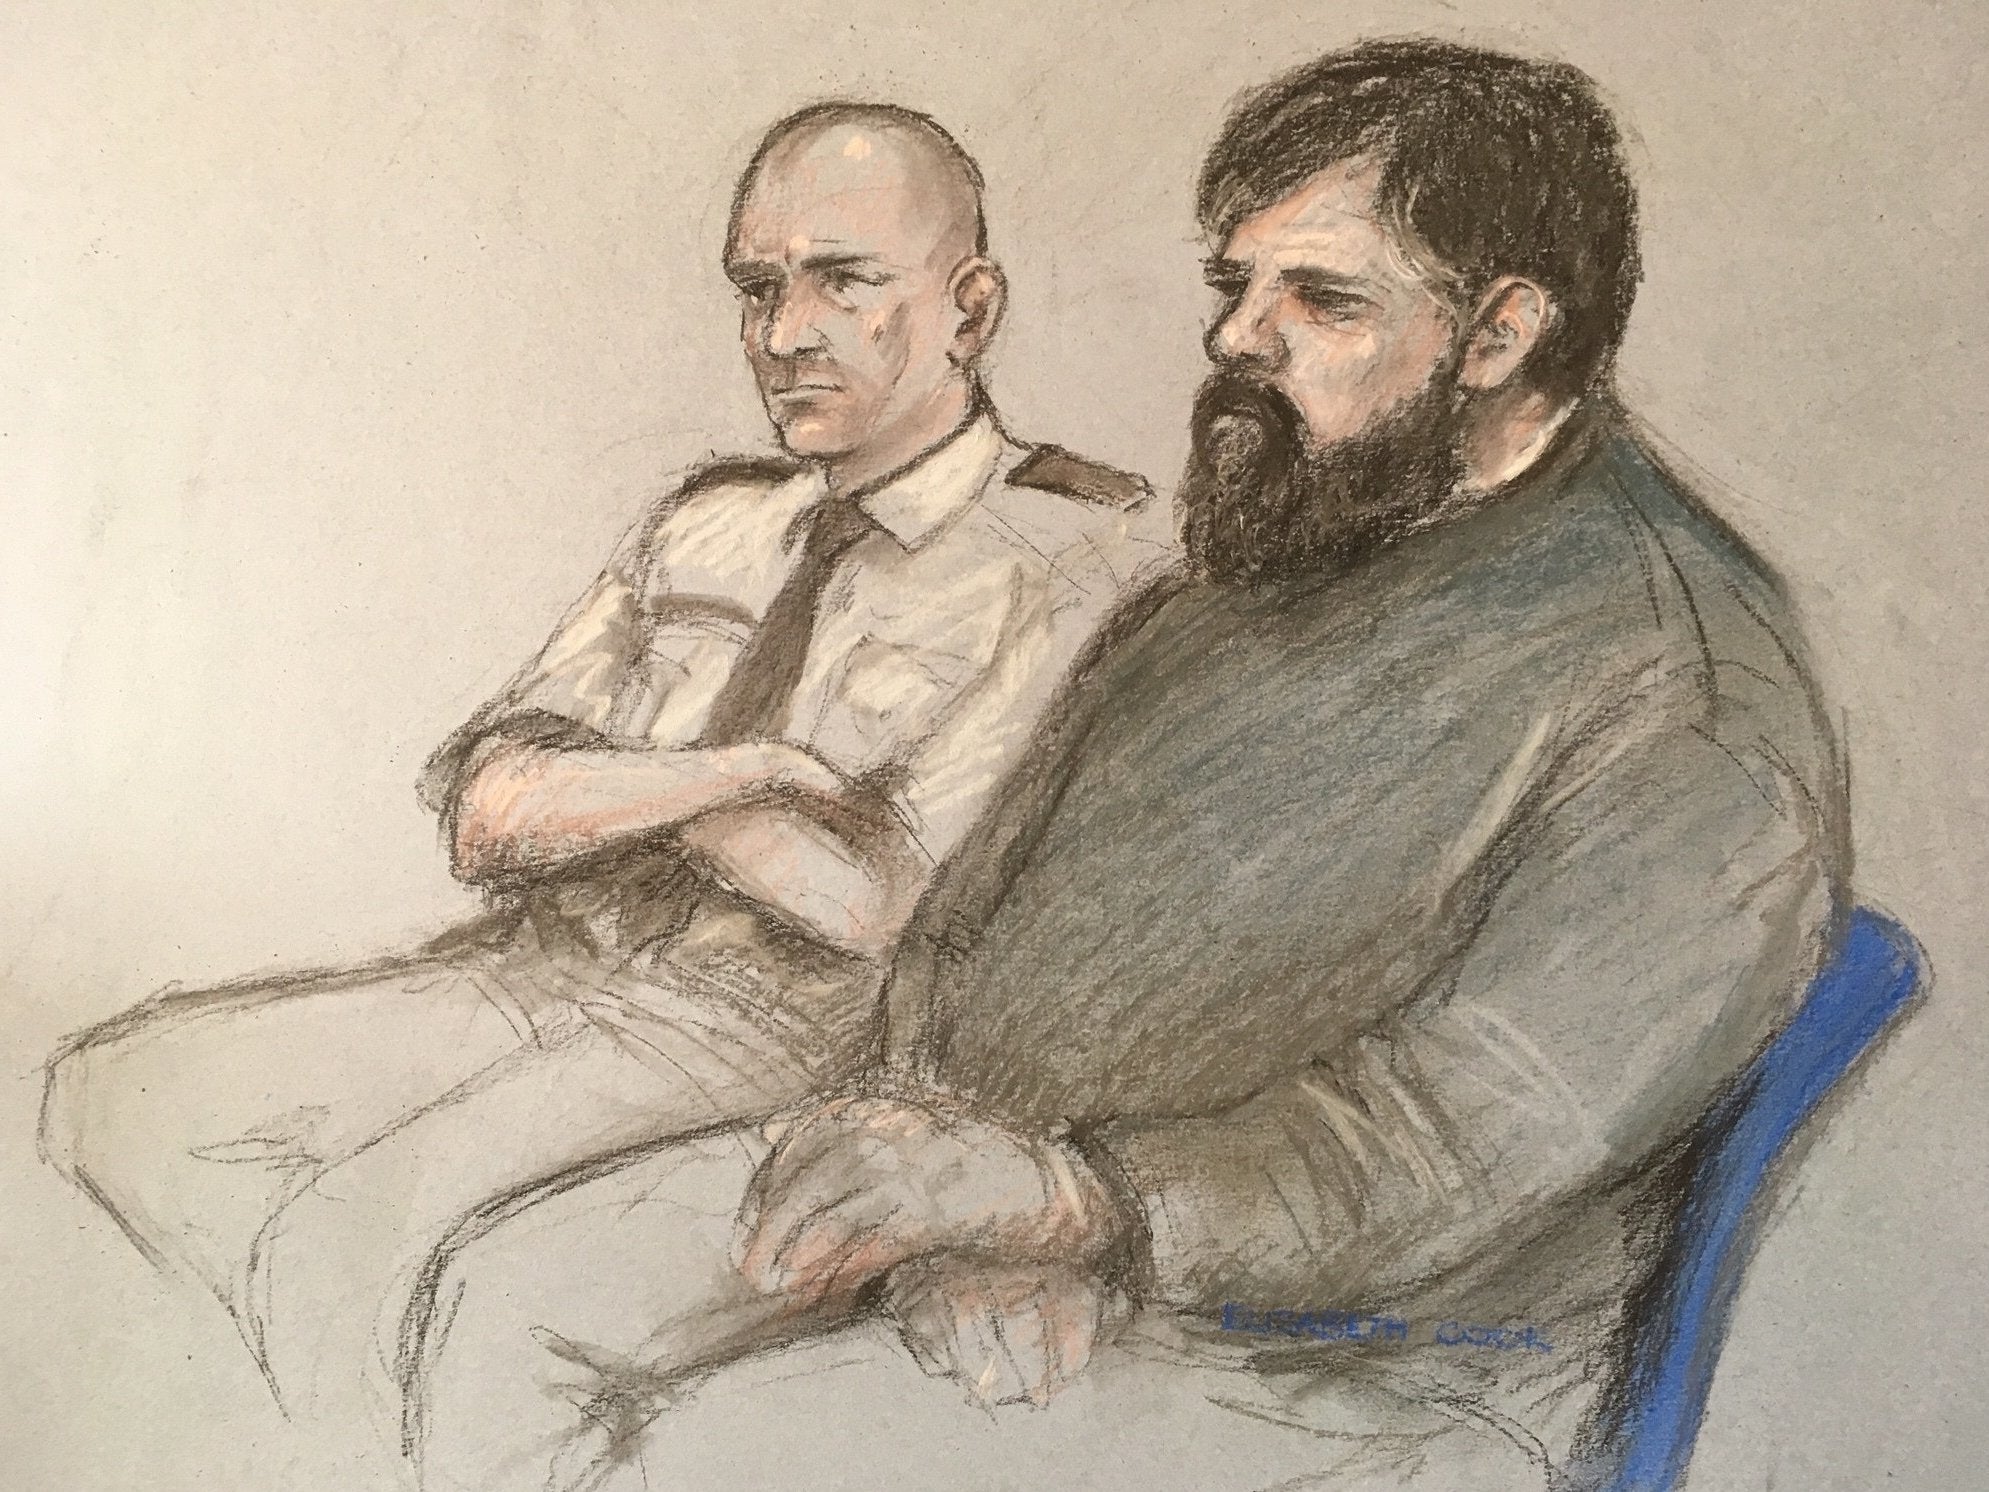 Carl Beech trial: Westminster VIP abuse accuser set up fake email account for &apos;witness&apos;, court told